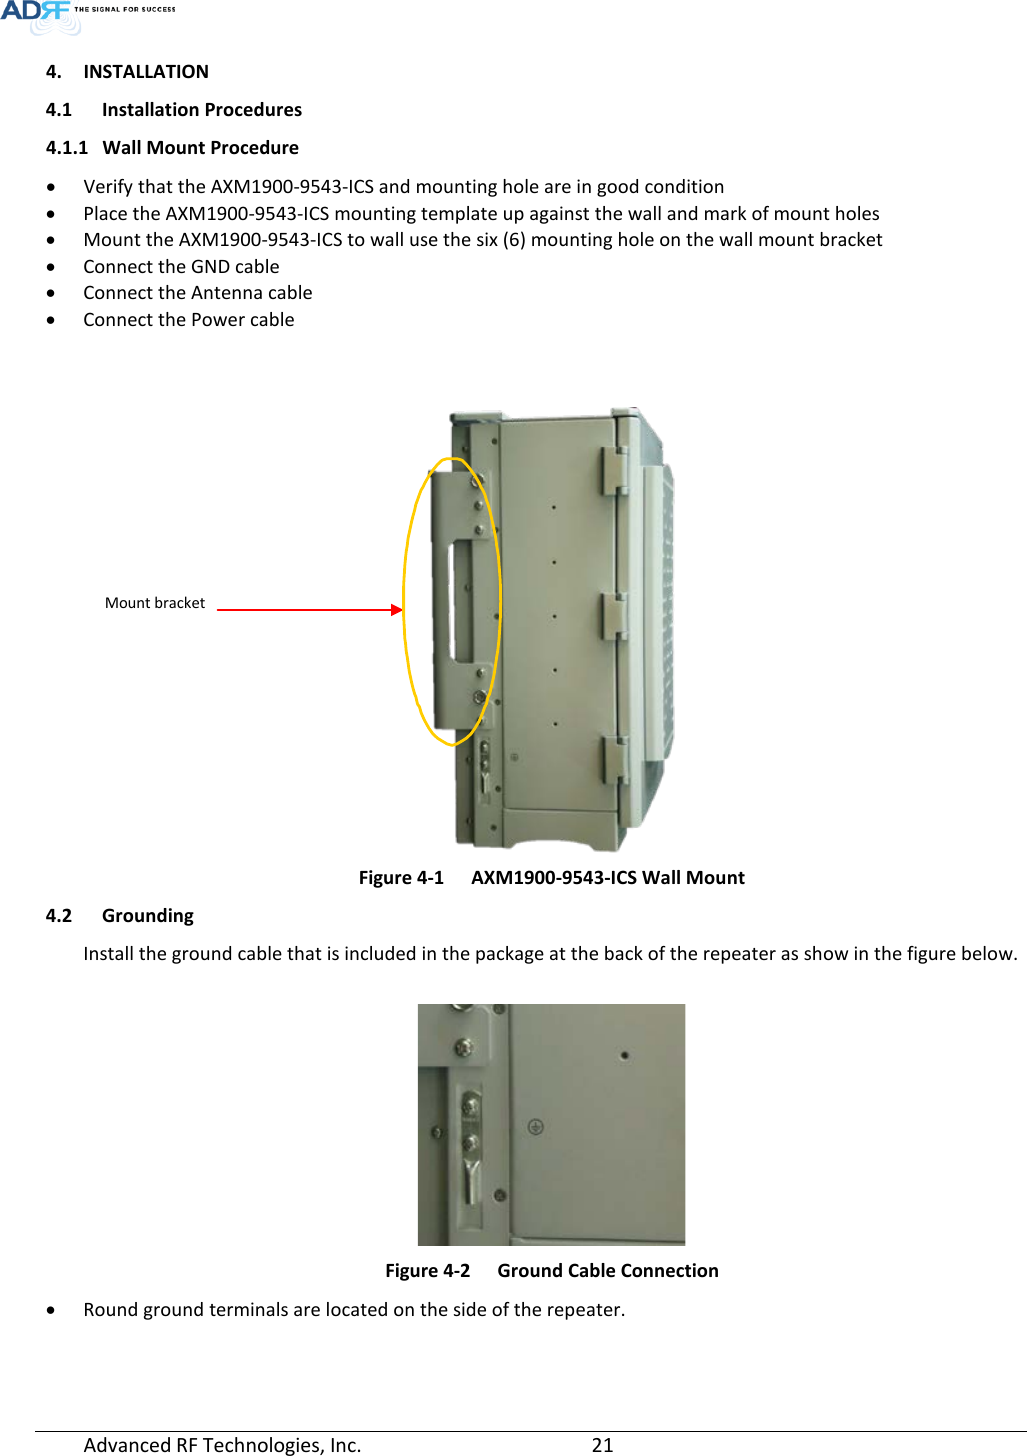  4. INSTALLATION 4.1 Installation Procedures 4.1.1 Wall Mount Procedure • Verify that the AXM1900-9543-ICS and mounting hole are in good condition • Place the AXM1900-9543-ICS mounting template up against the wall and mark of mount holes • Mount the AXM1900-9543-ICS to wall use the six (6) mounting hole on the wall mount bracket • Connect the GND cable • Connect the Antenna cable • Connect the Power cable    Figure 4-1  AXM1900-9543-ICS Wall Mount 4.2 Grounding Install the ground cable that is included in the package at the back of the repeater as show in the figure below.   Figure 4-2  Ground Cable Connection • Round ground terminals are located on the side of the repeater.     Mount bracket Advanced RF Technologies, Inc.       21    